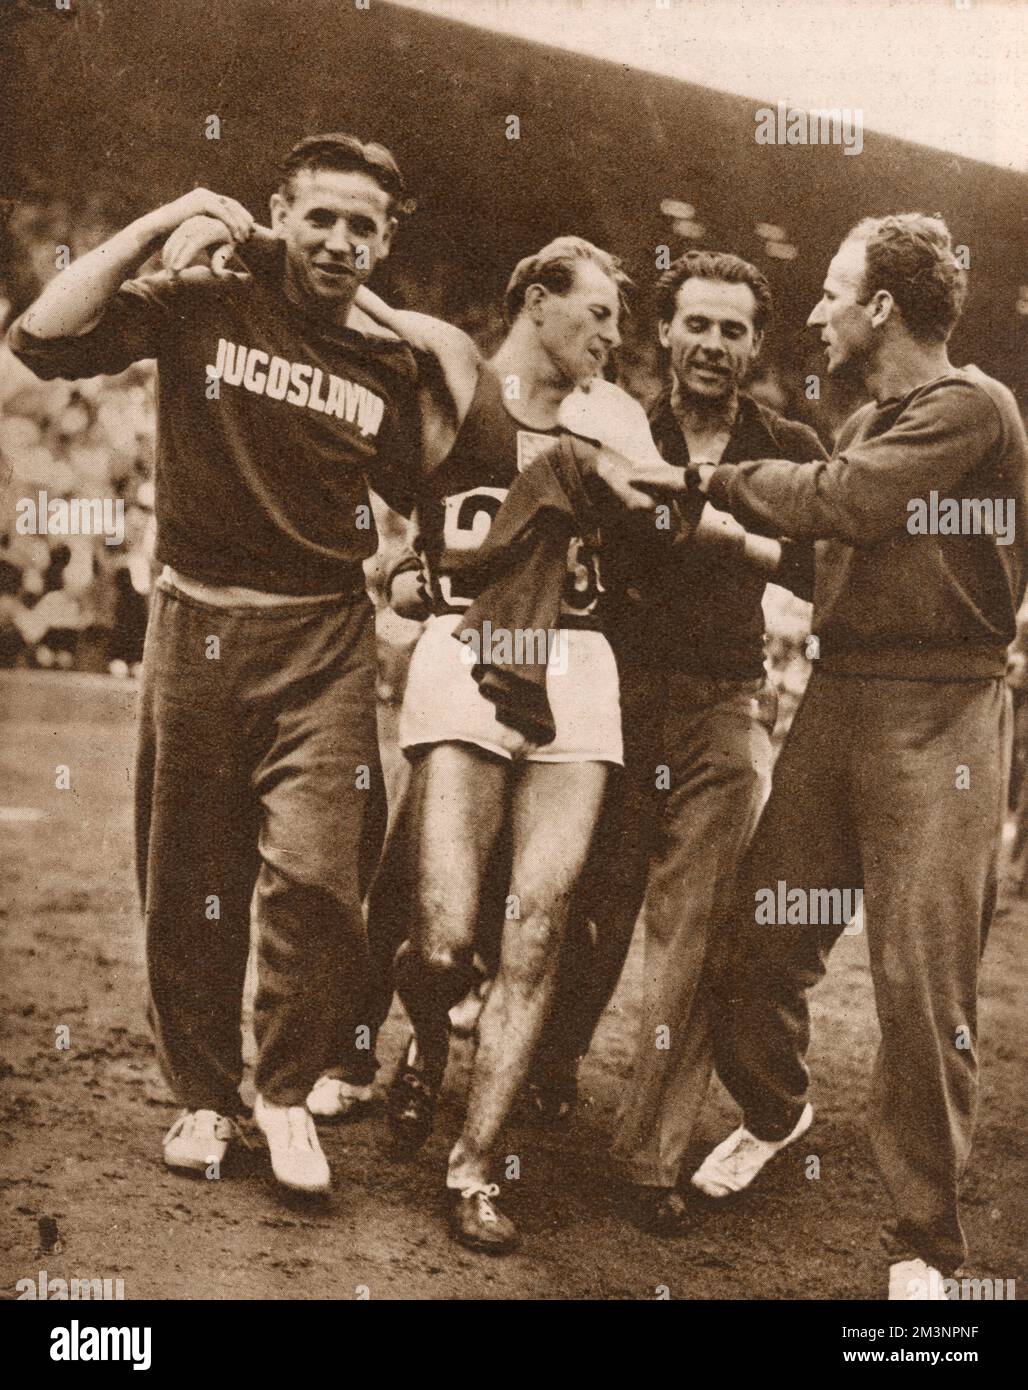 Emil Zatopek (1922 - 2000), Czech long distance runner pictured following his victory in the 10,000m race at the London 1948 Olympic Games, only the second race he had ever run at that distance. Four years later, at the Helsinki Games he won gold in the 5000 metres and 10,000 metres runs, but his final medal came when he decided at the last minute to compete in the first marathon of his life. He was nicknamed the &quot;Czech Locomotive&quot; for his multiple golds.       Date: 1948 Stock Photo